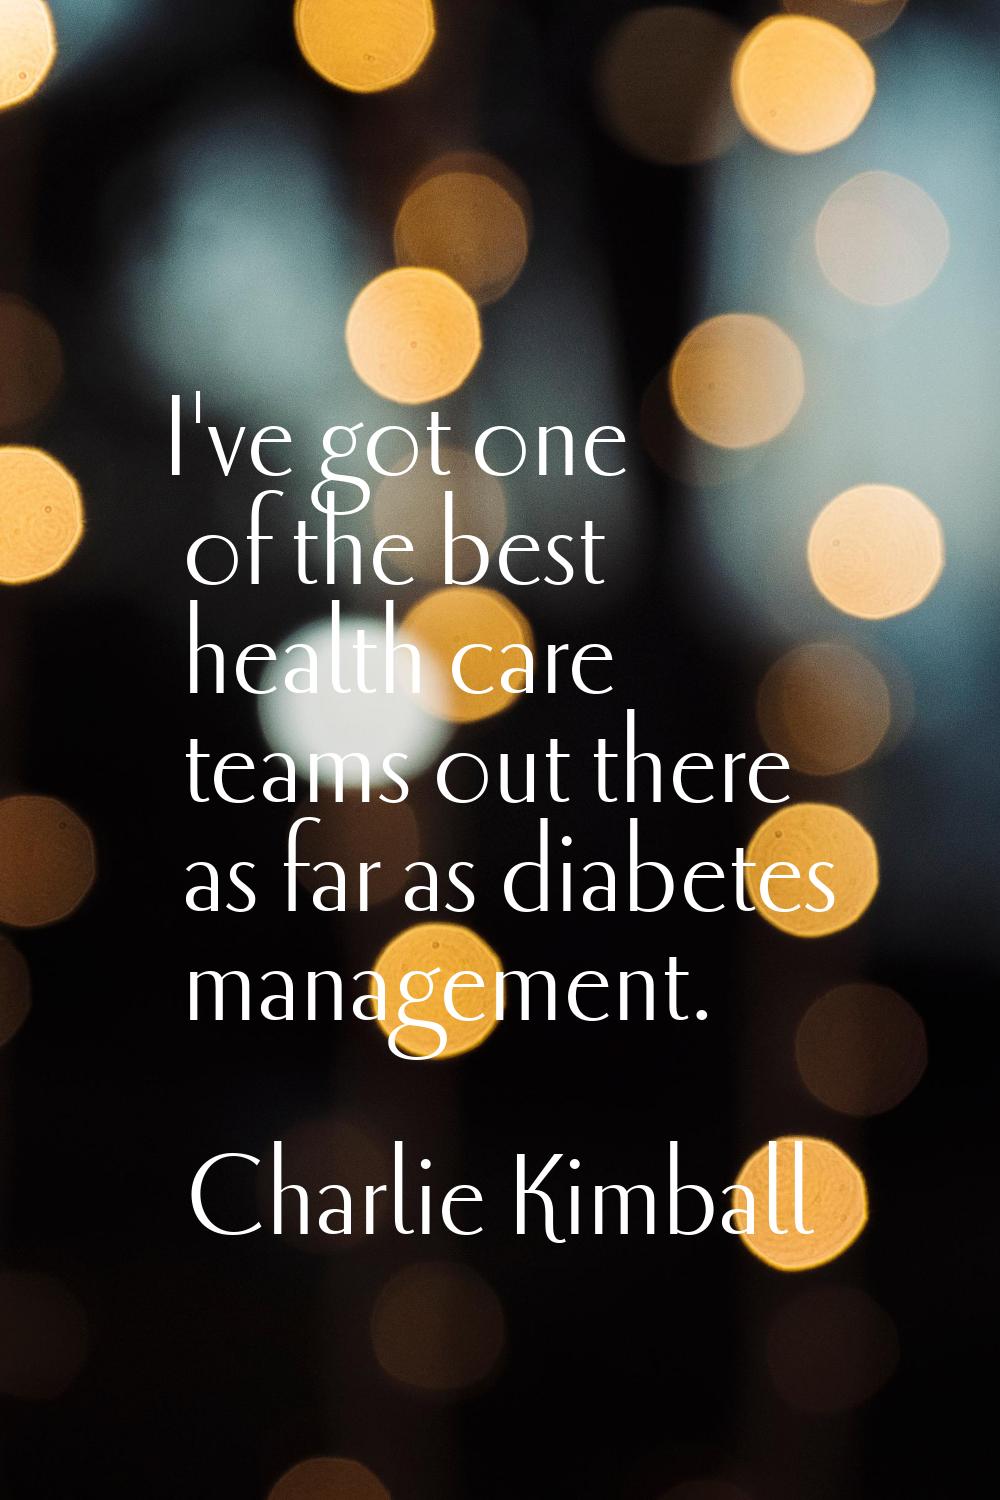 I've got one of the best health care teams out there as far as diabetes management.